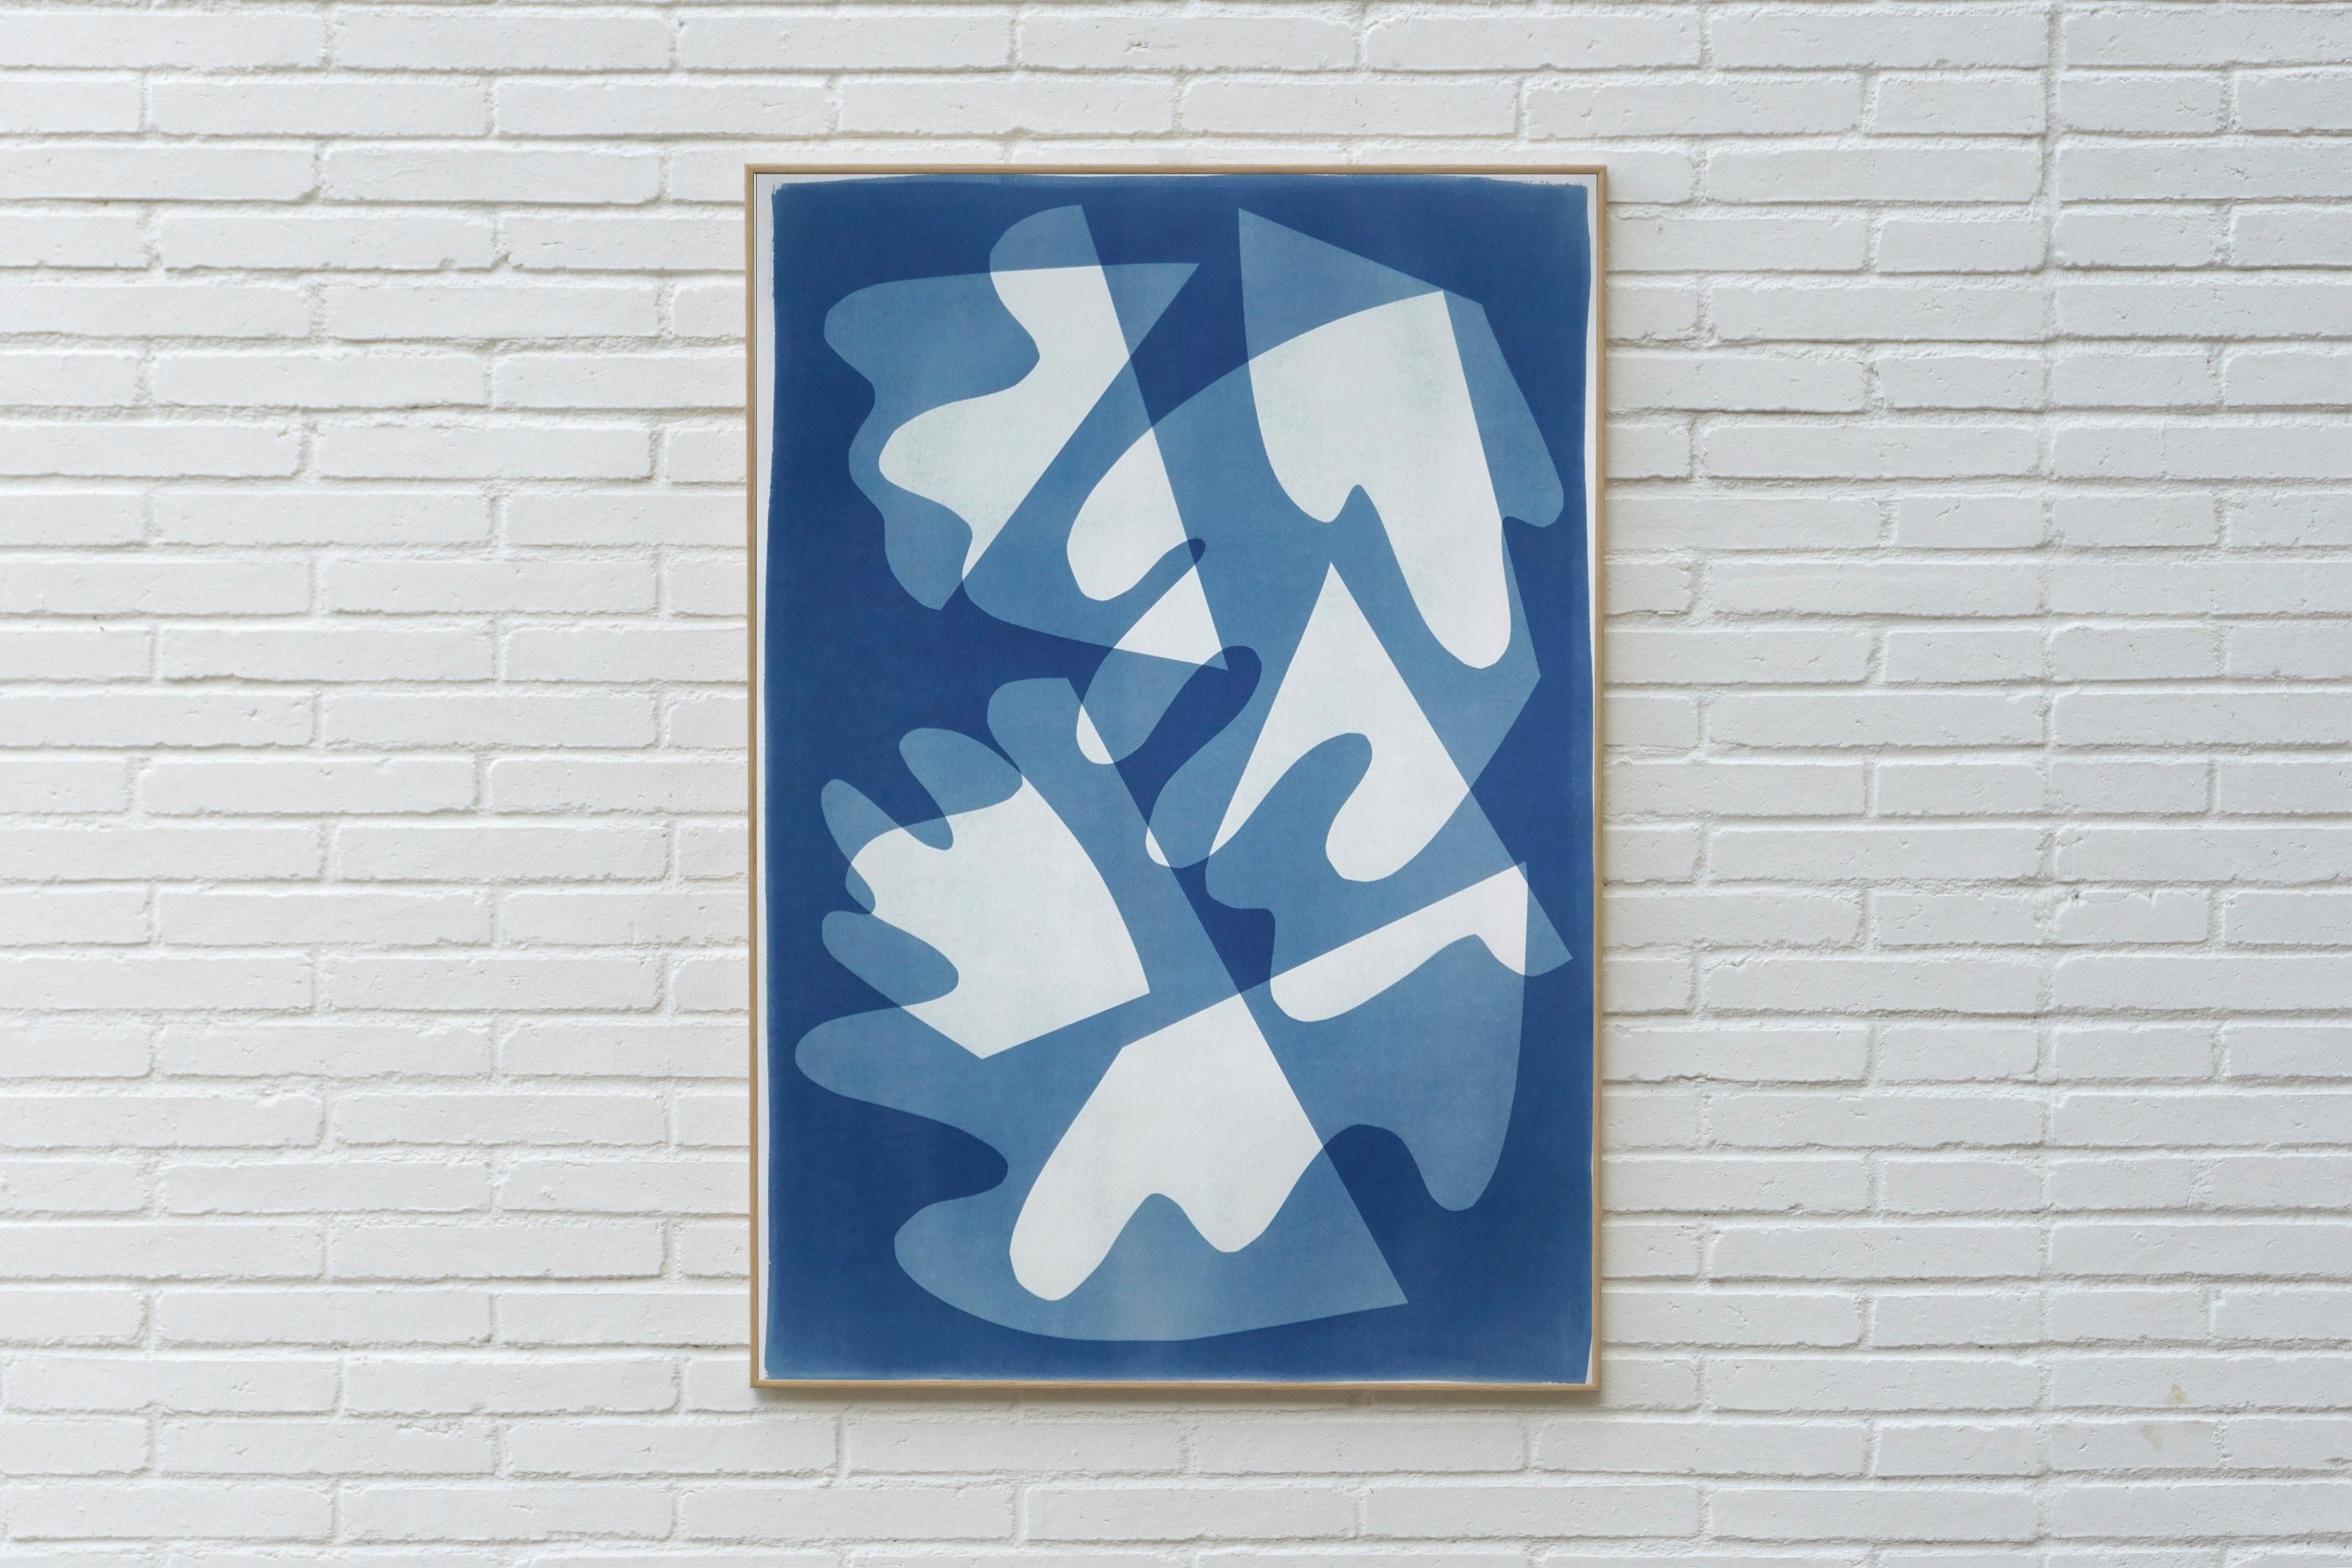 Walking on Glass, Unique Monotype, Cutouts Mid-century Shapes in Blue Tones 2021 For Sale 3